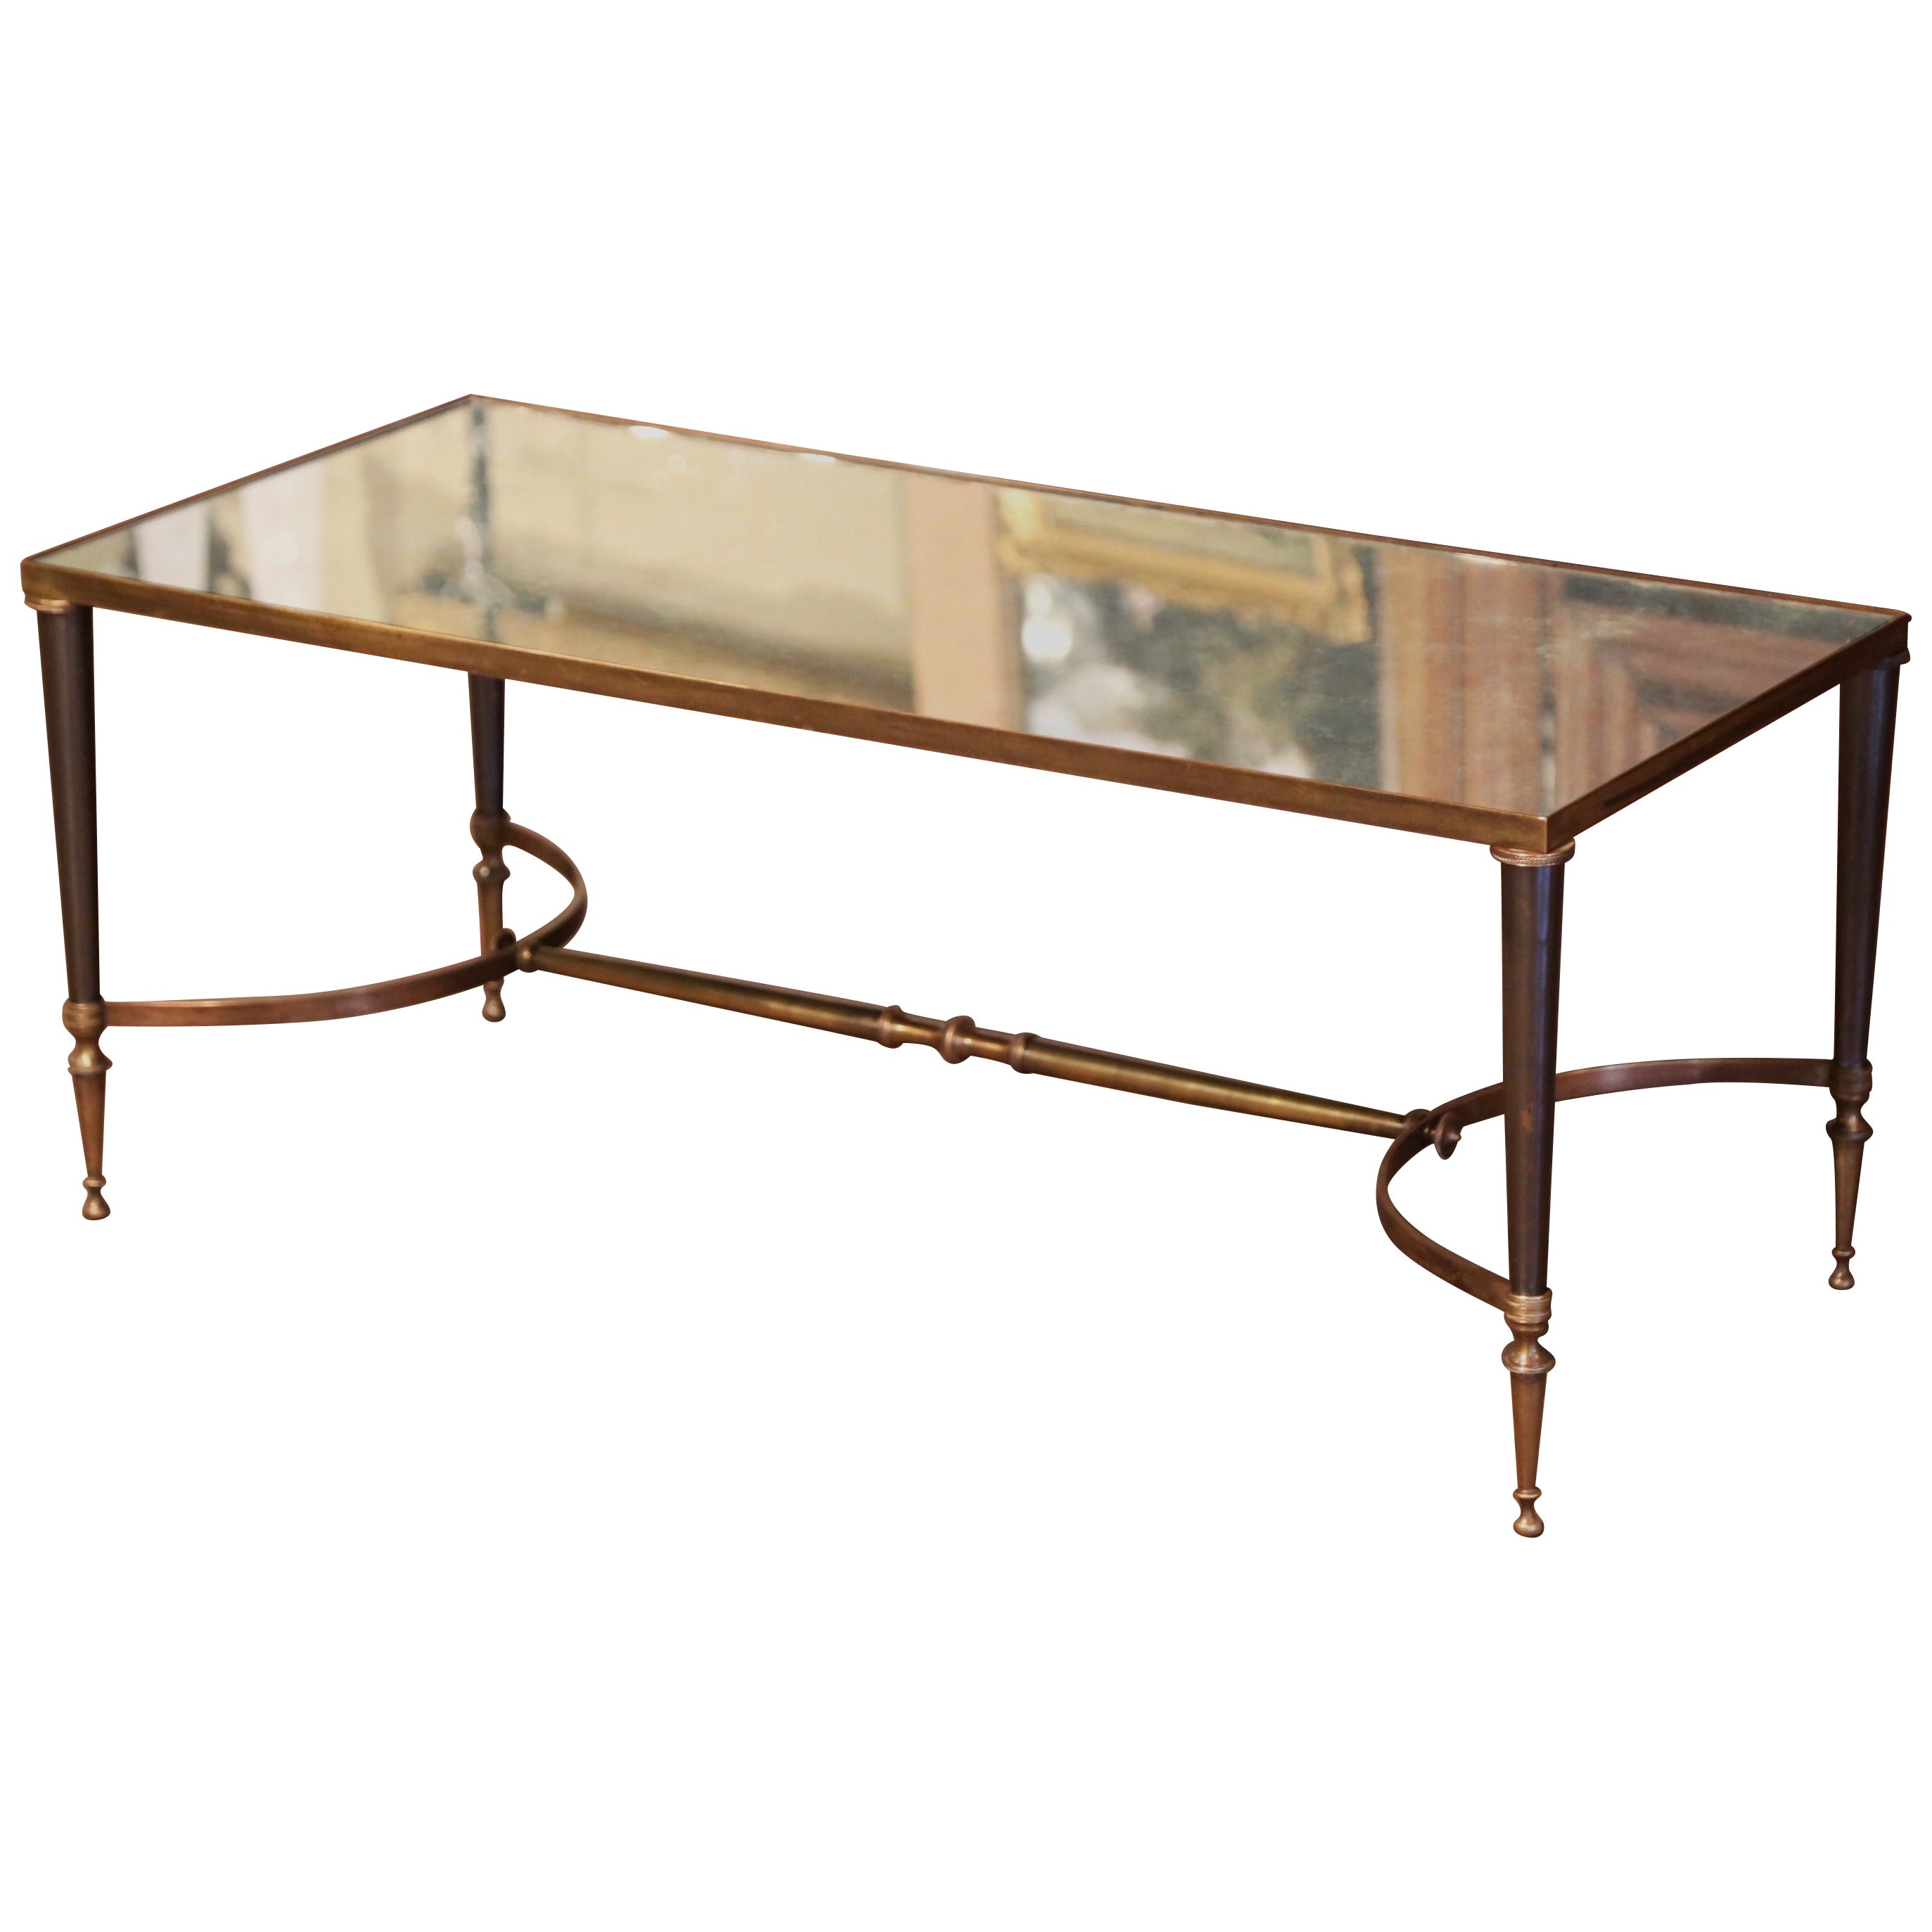 Mid-Century French Bronze Dore Mirrored Coffee Table from Maison Baguès